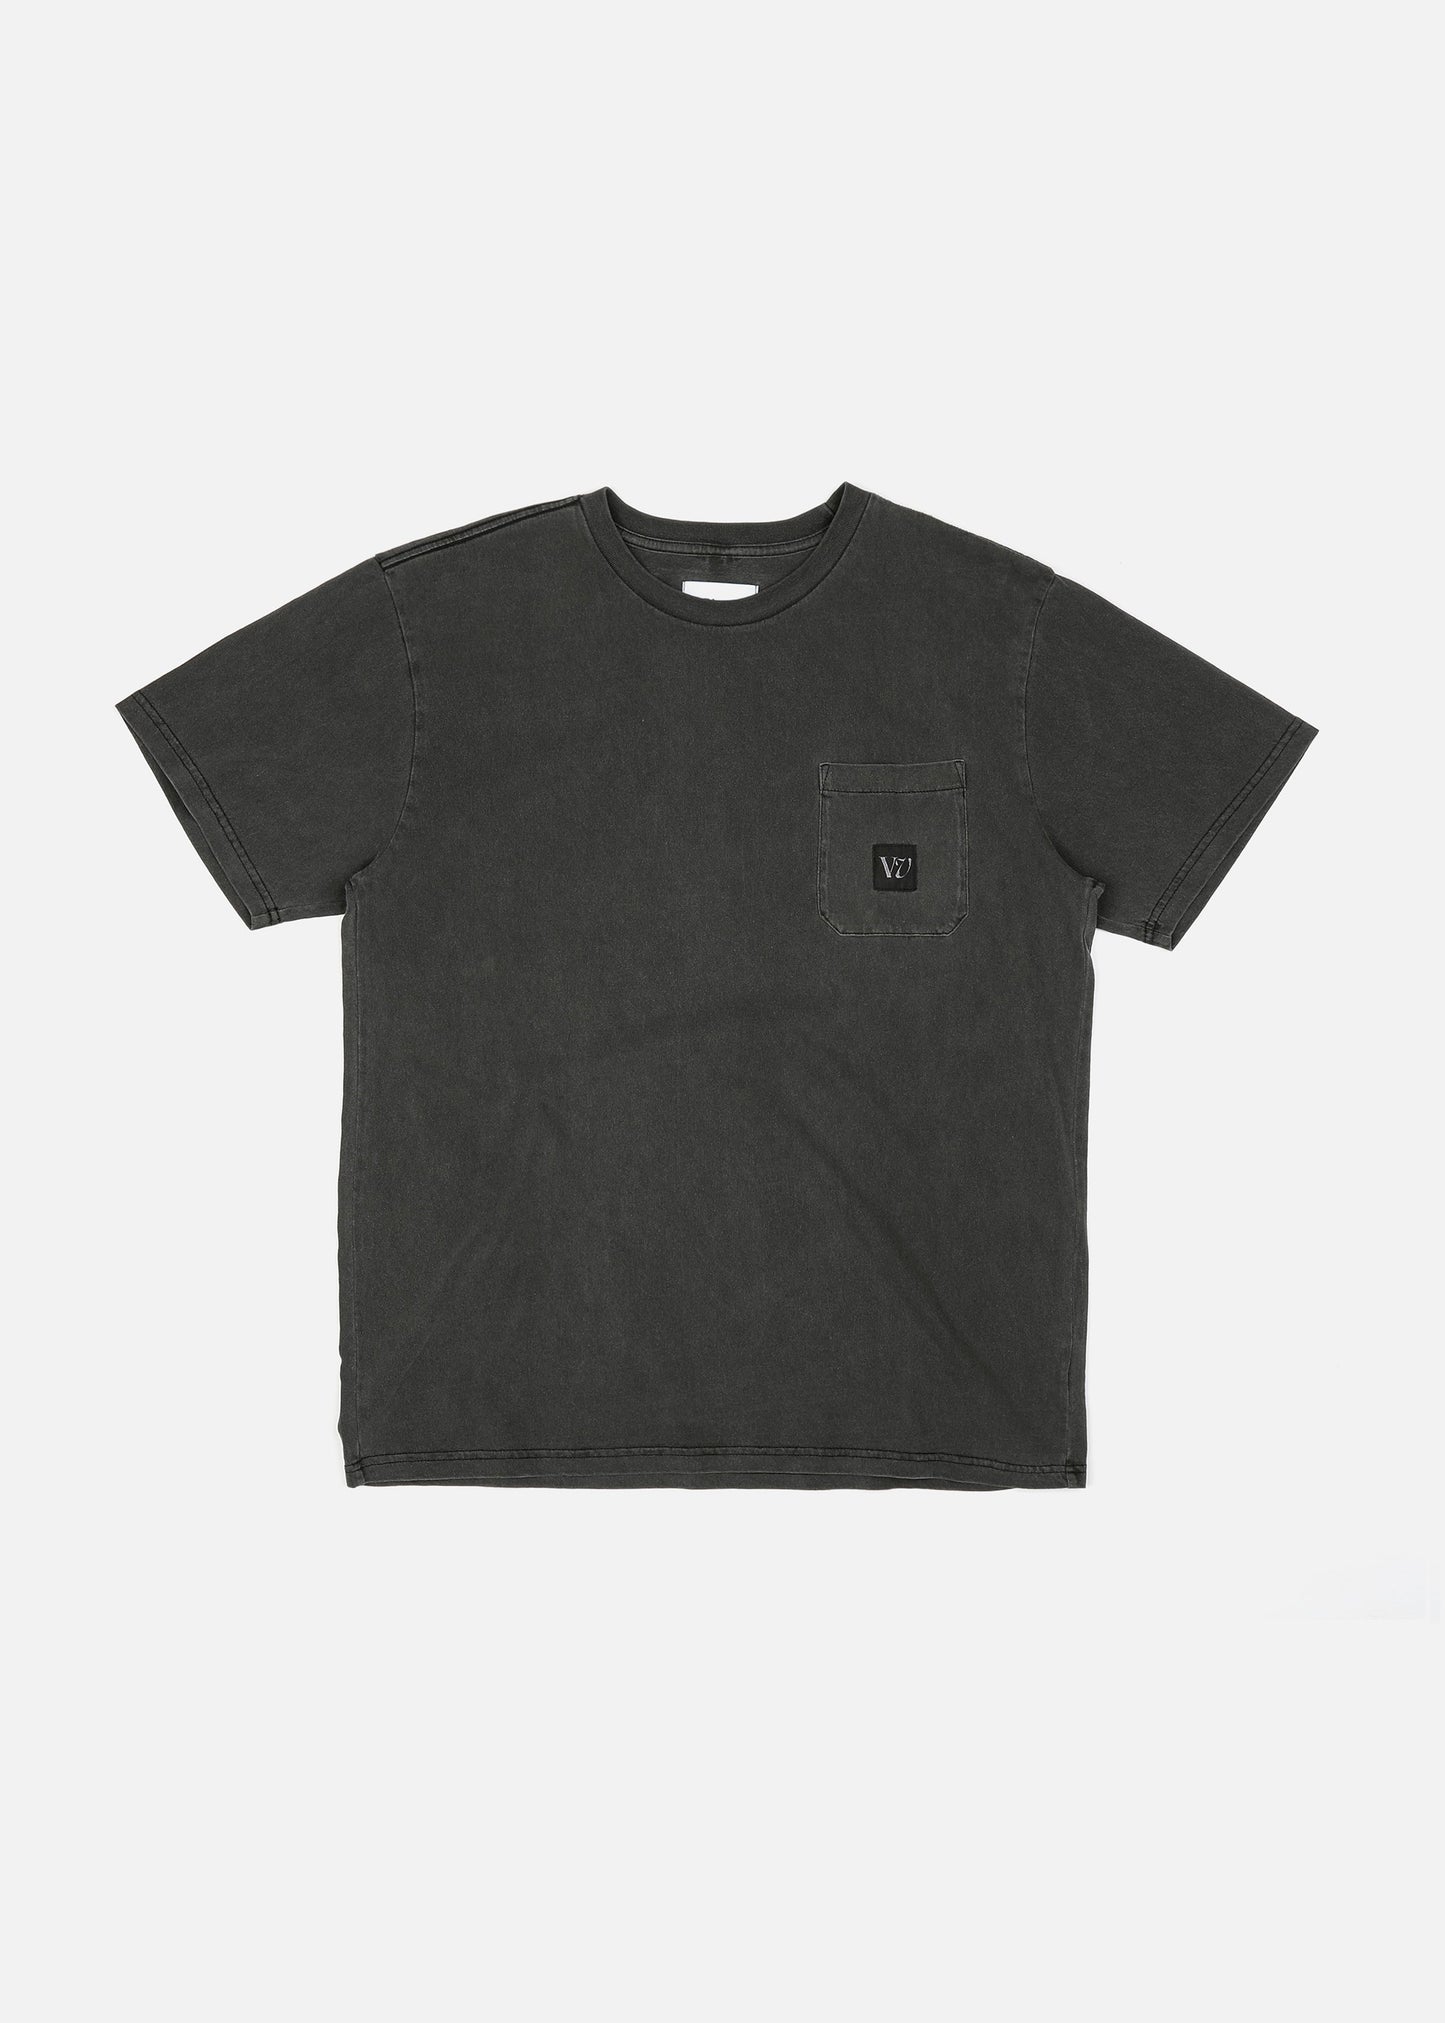 CAUSE & EFFECT T-SHIRT : WASHED BLACK